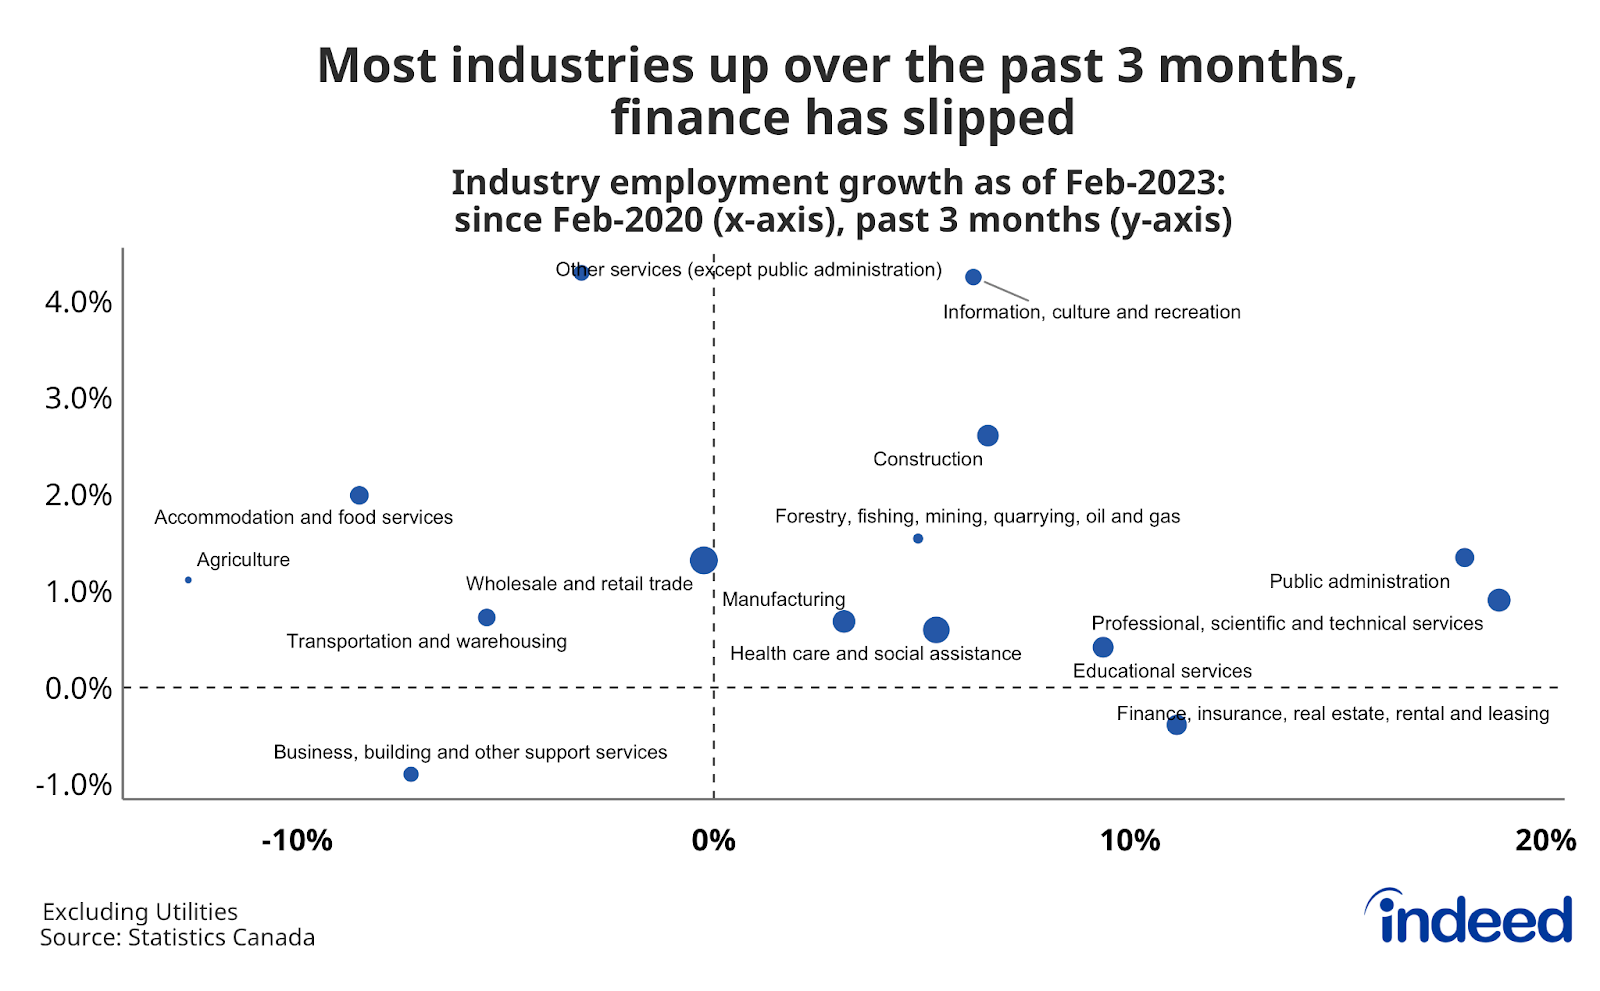 A scatter plot chart titled “Most industries up over the past 3 months, finance has slipped,” with each data point representing how employment in different industries stood in February 2023.